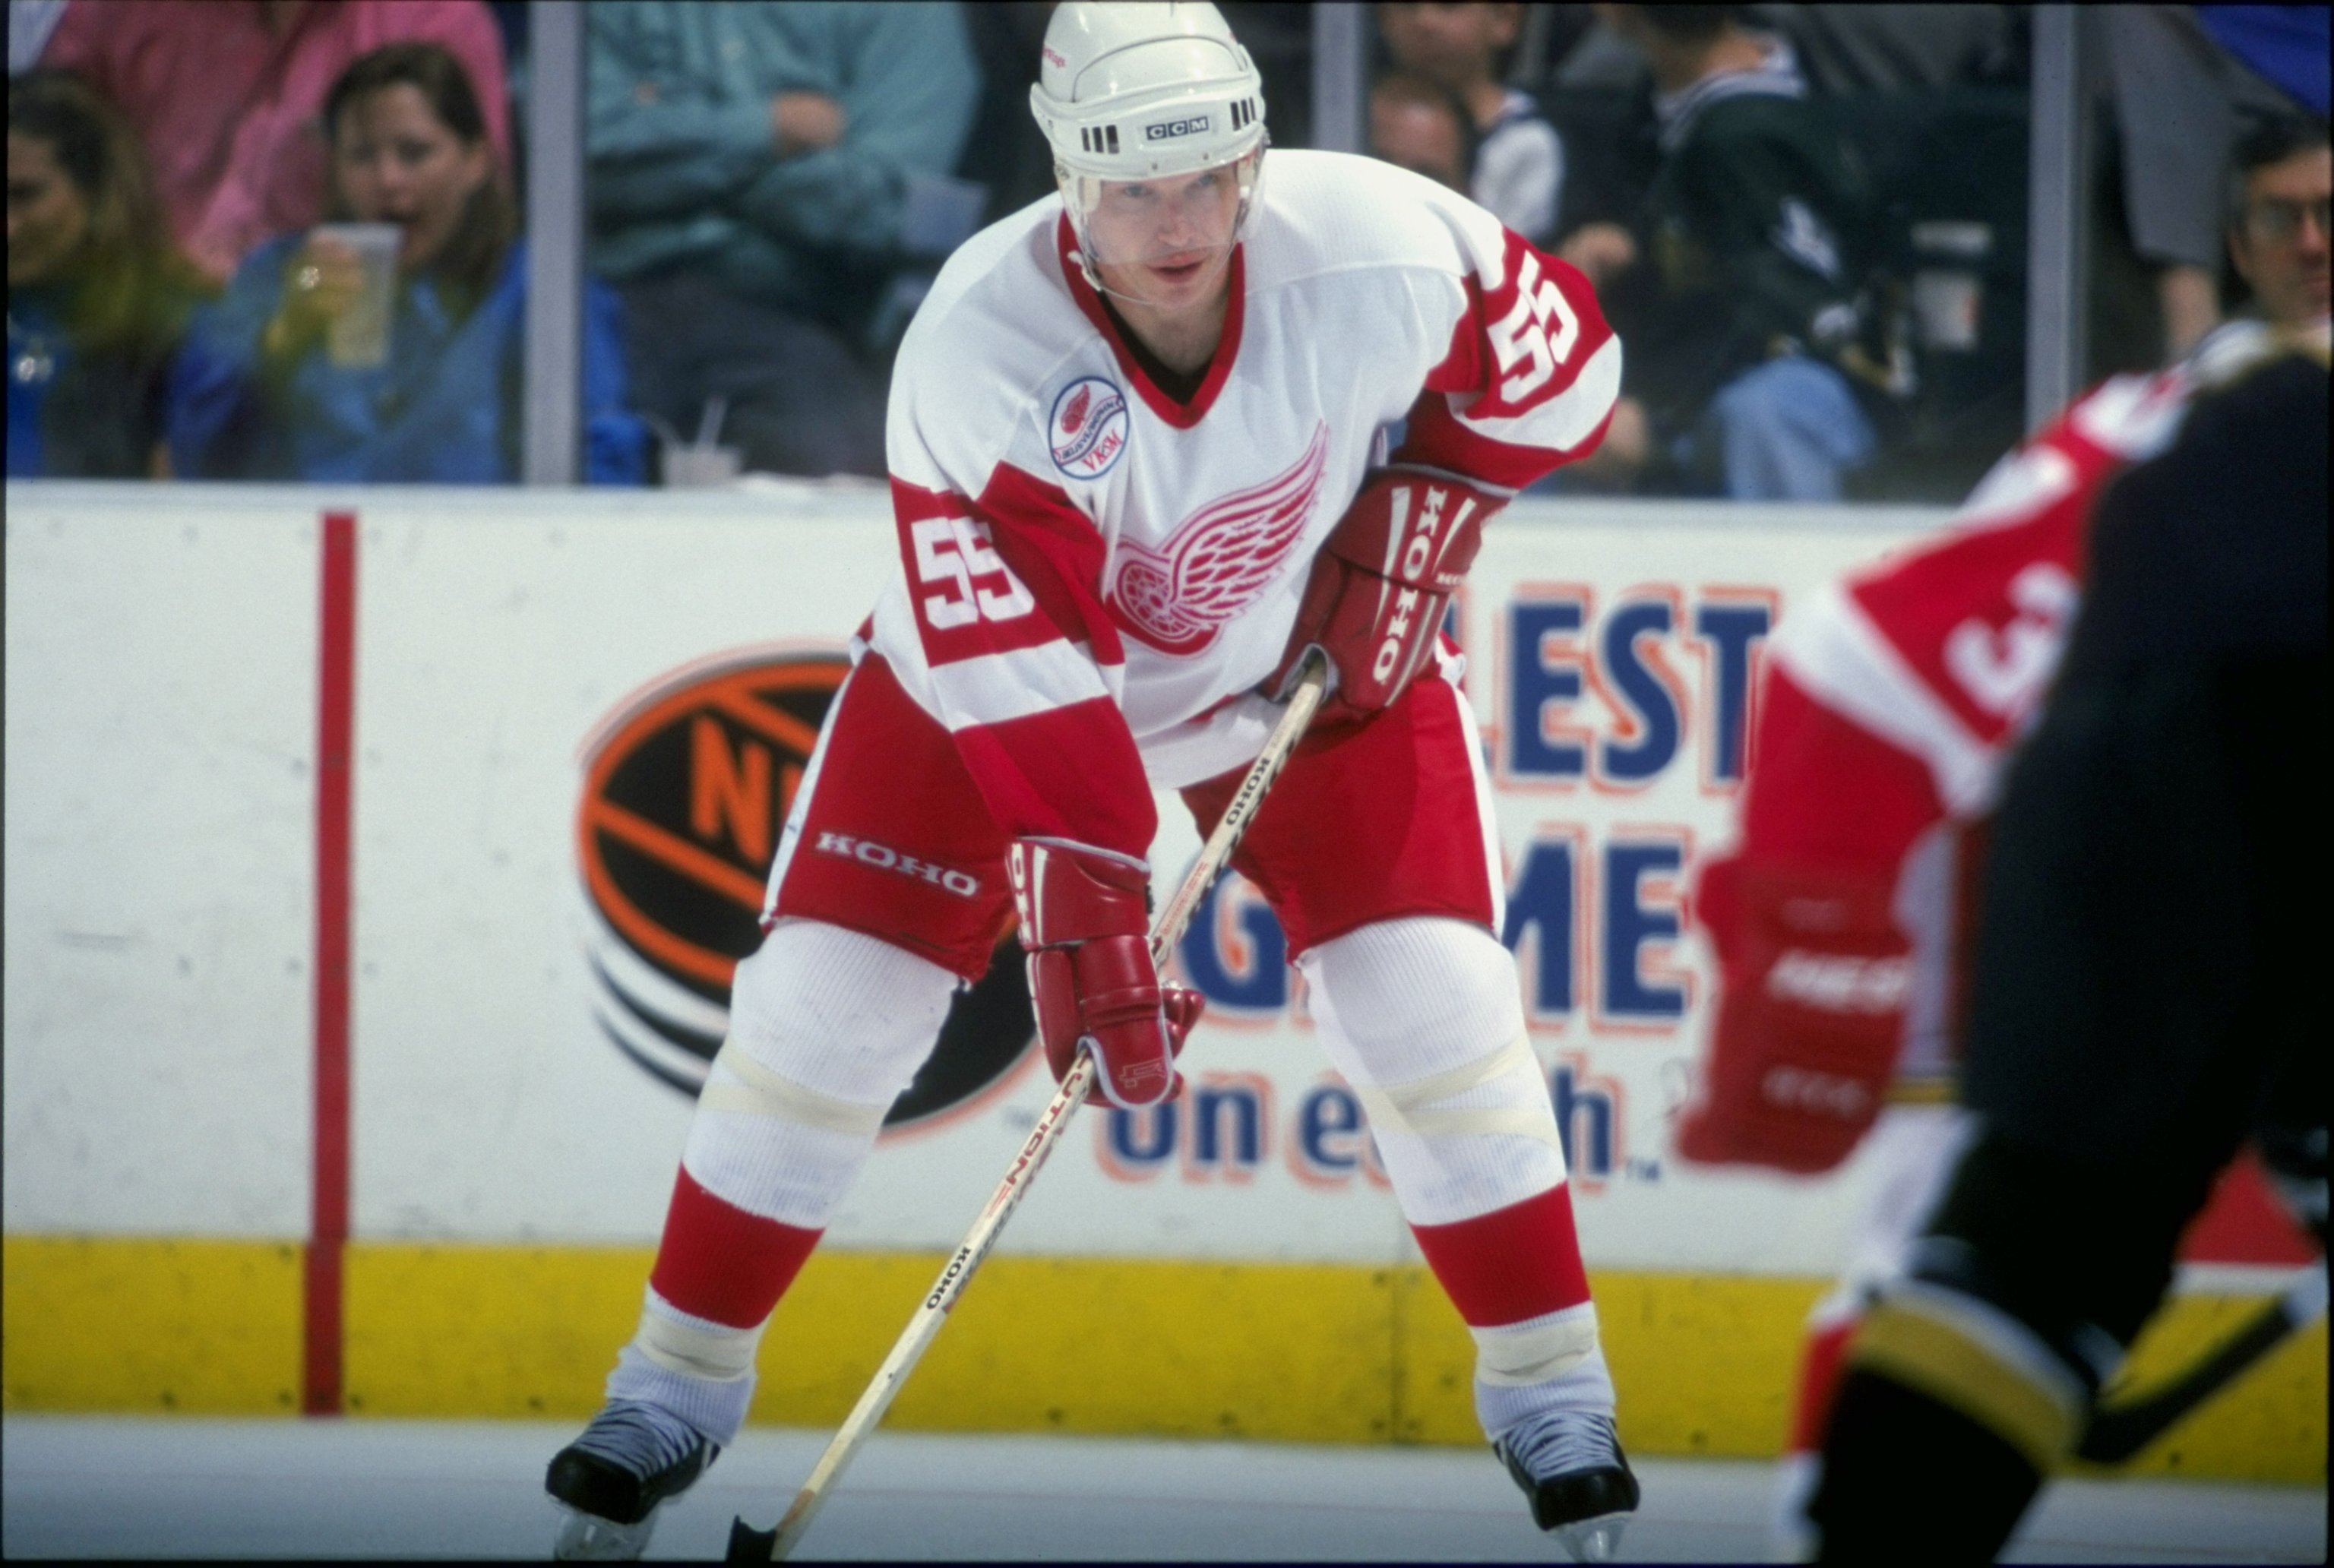 15 Apr 1998:  Defenseman Larry Murphy of the Detroit Red Wings in action during a game against the Dallas Stars at the Reunion Arena in Dallas, Texas. The Stars defeated the Red Wings 3-1. Mandatory Credit: Stephen Dunn  /Allsport